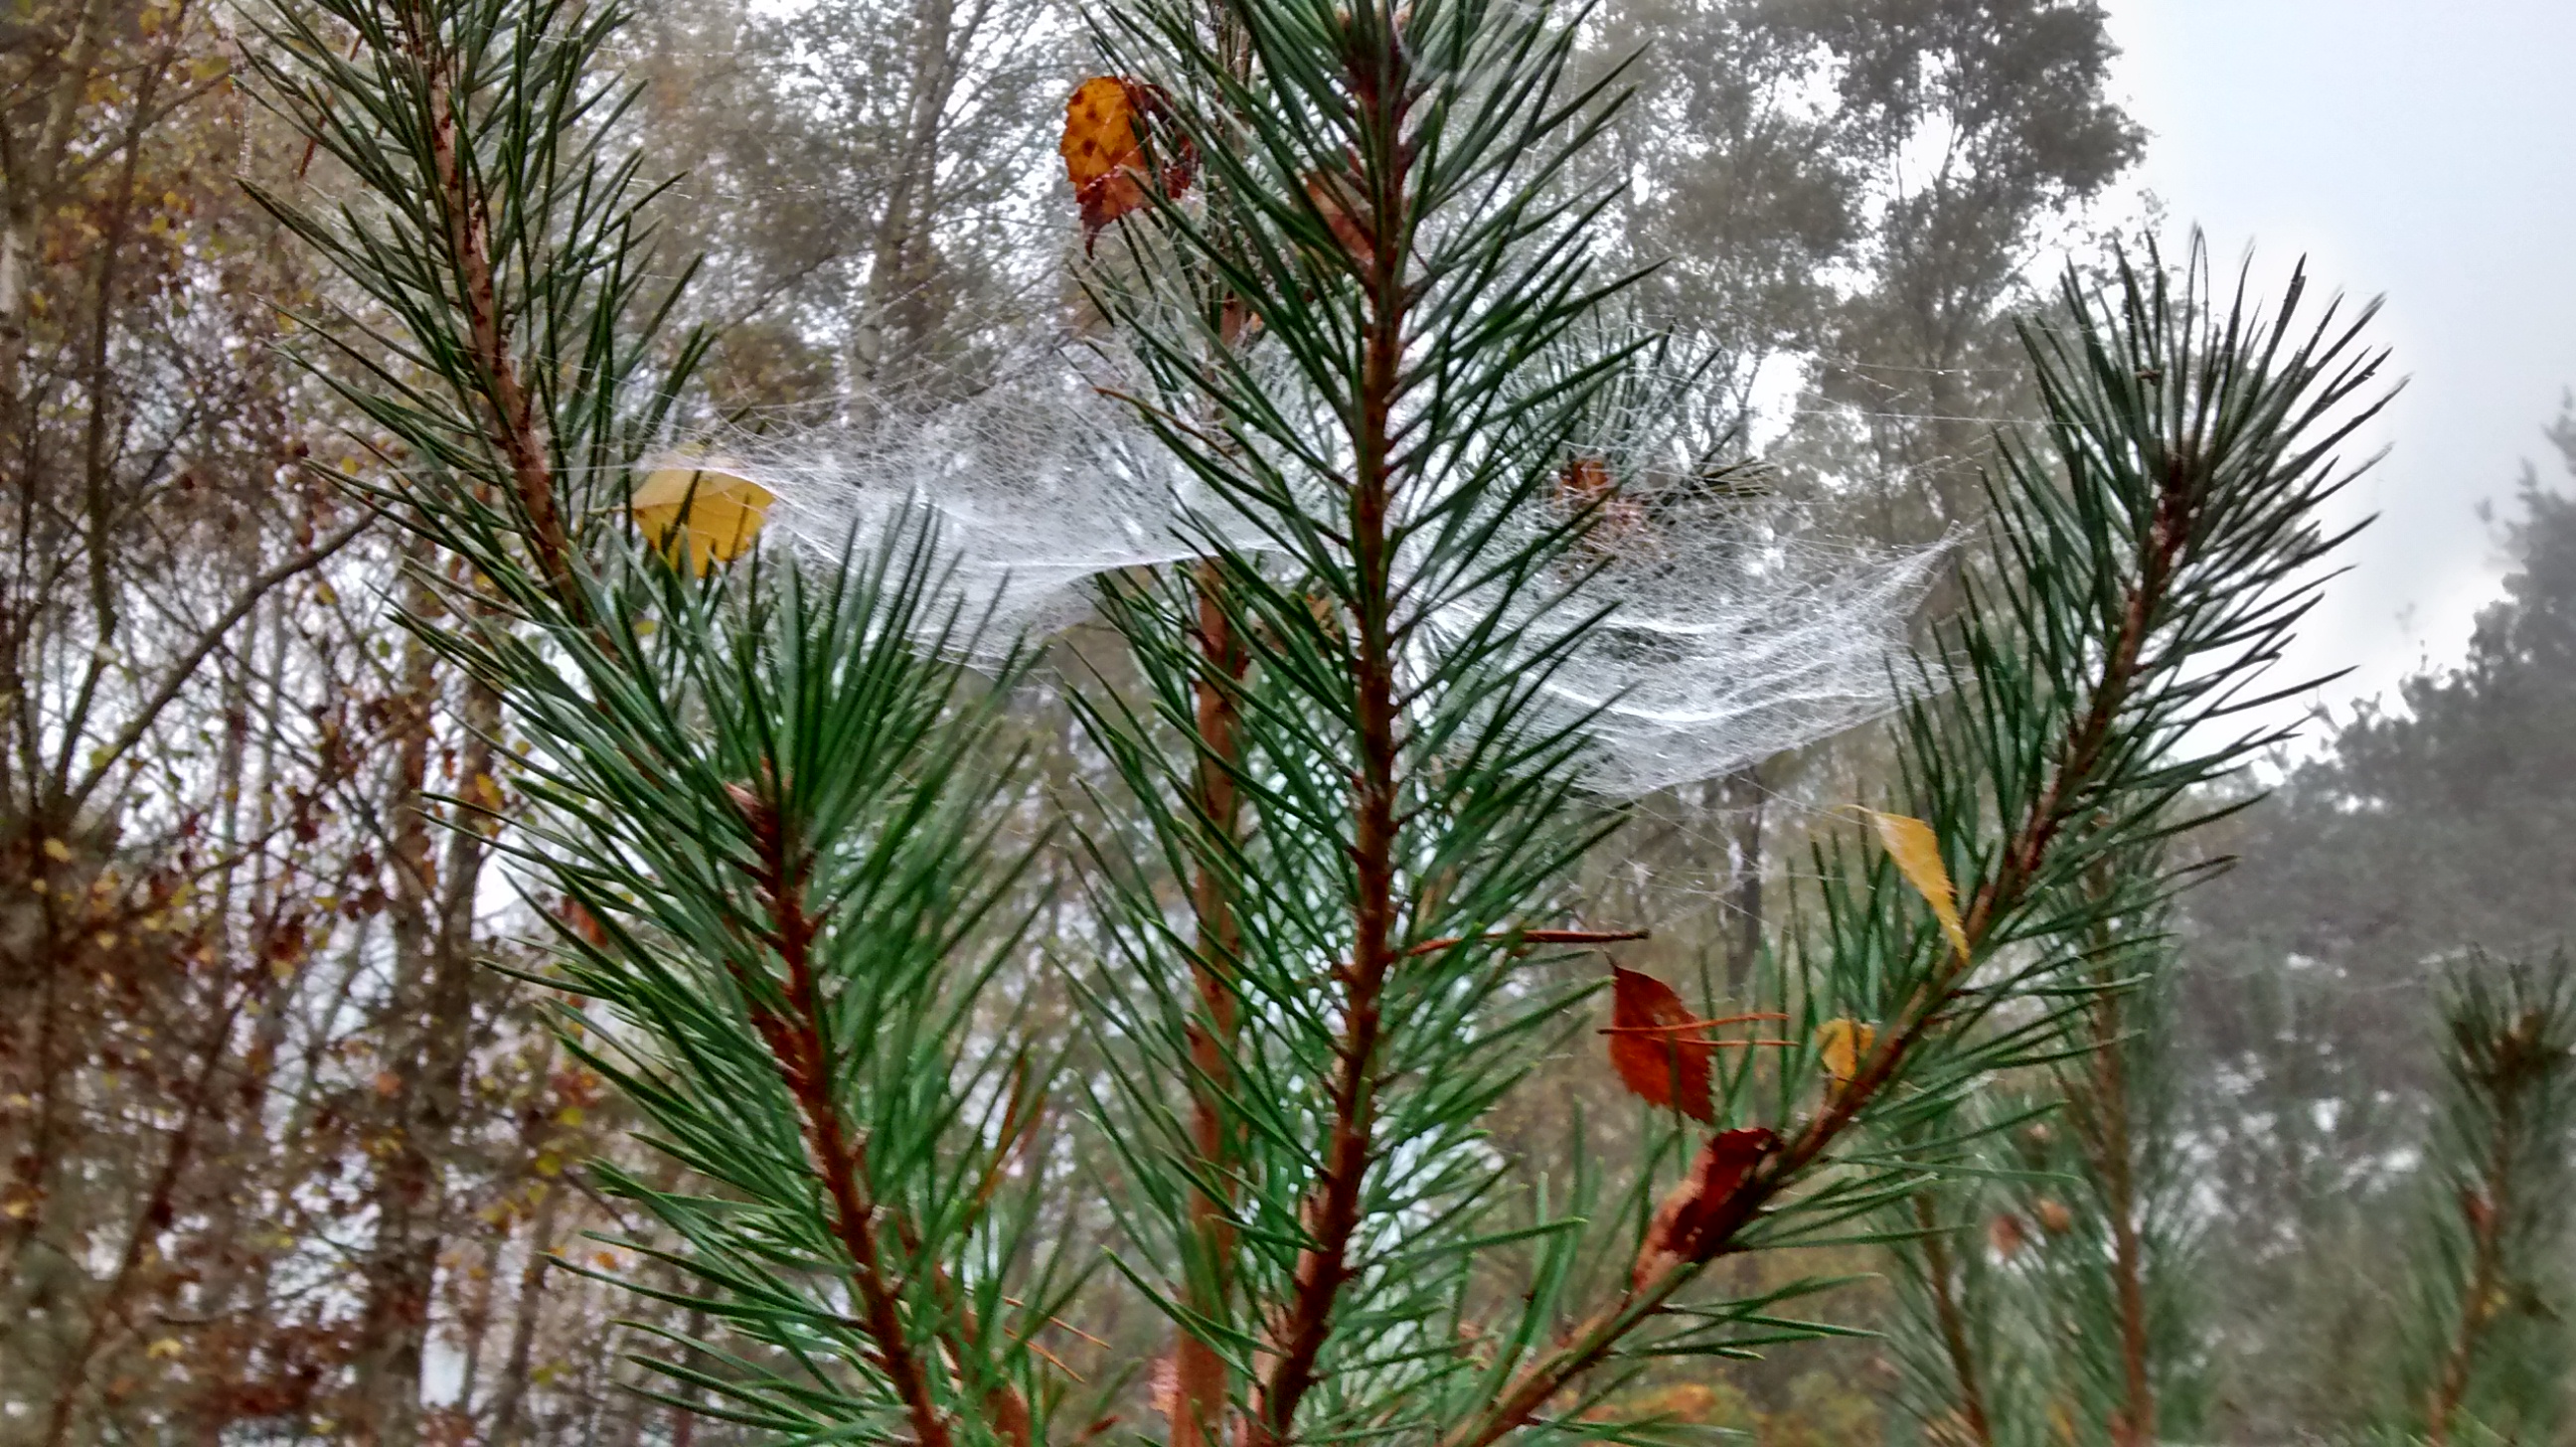 A pine tree against a back drop of winter trees, with cobwebs in the foreground